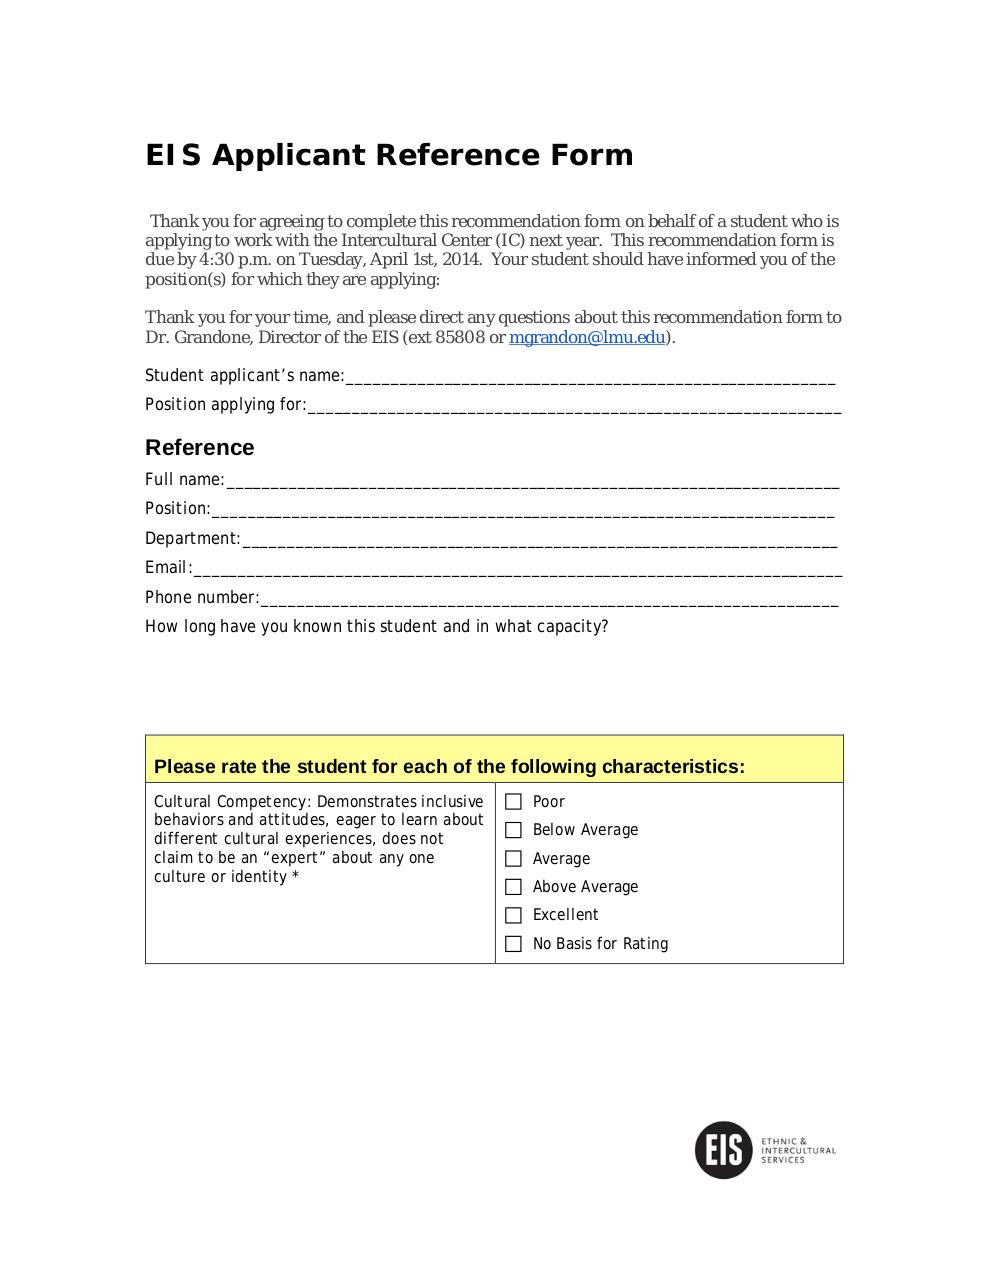 is main applicant a additional applicant